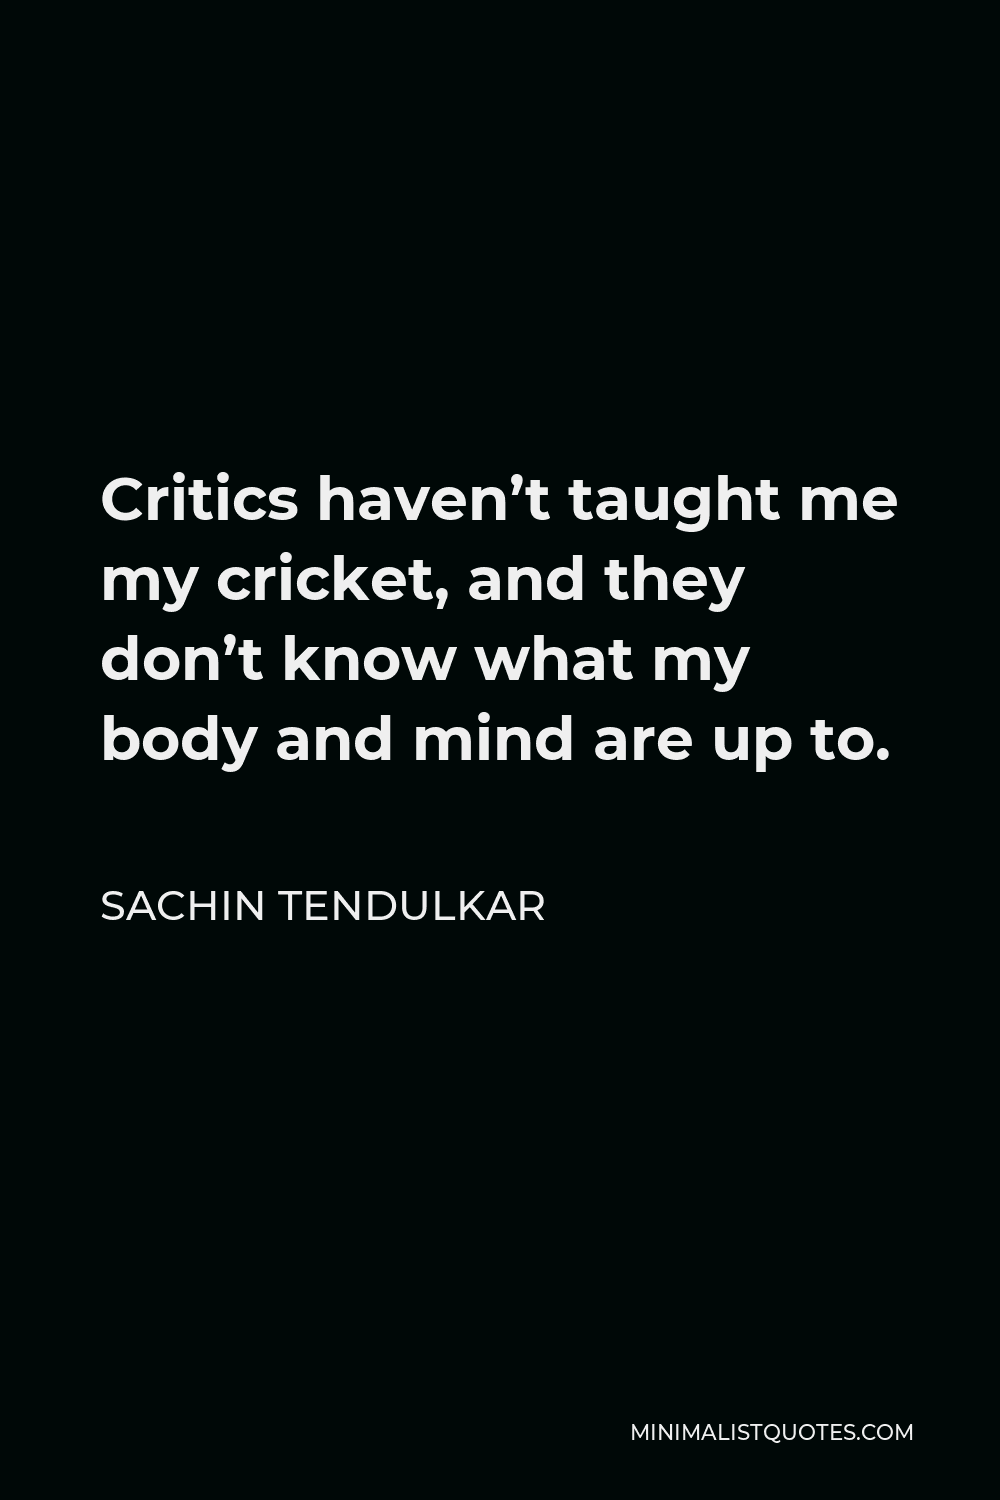 Sachin Tendulkar Quote - Critics haven’t taught me my cricket, and they don’t know what my body and mind are up to.